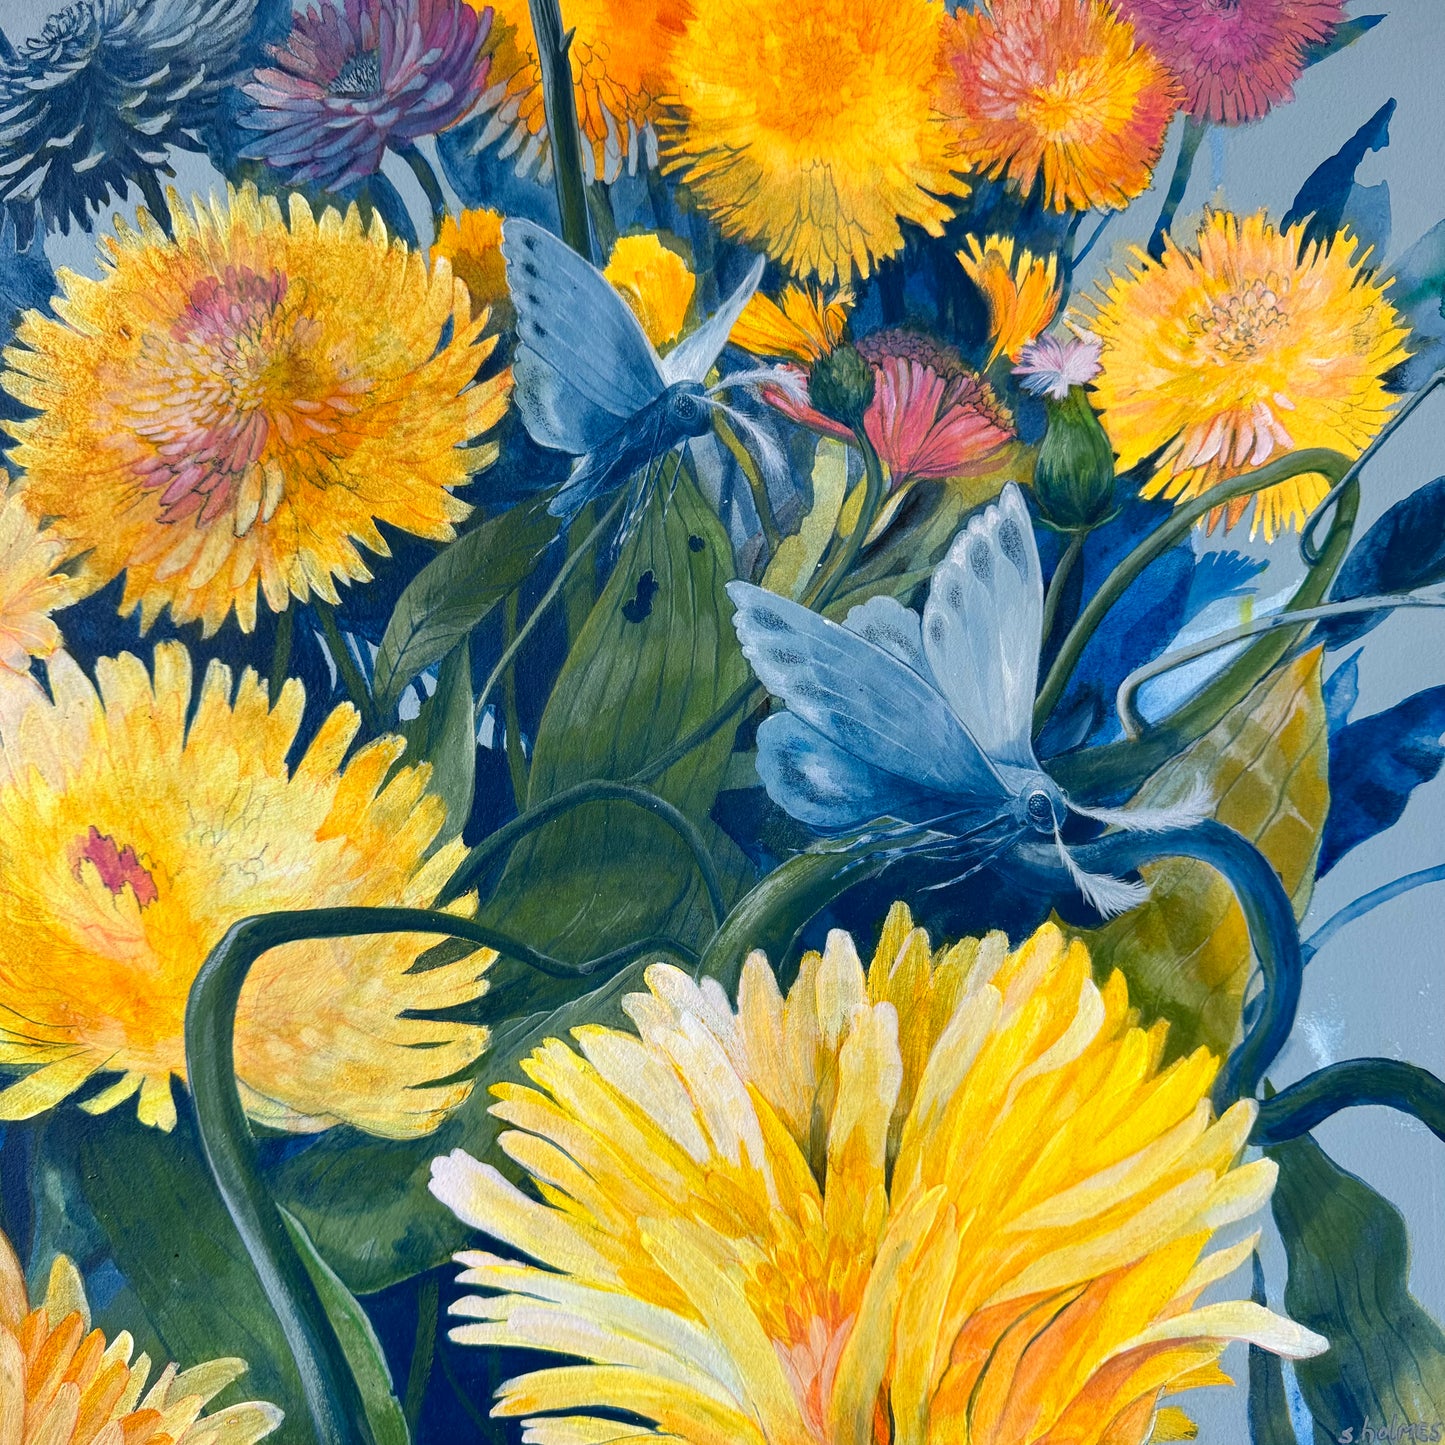 Between the Dandelions limited edition print